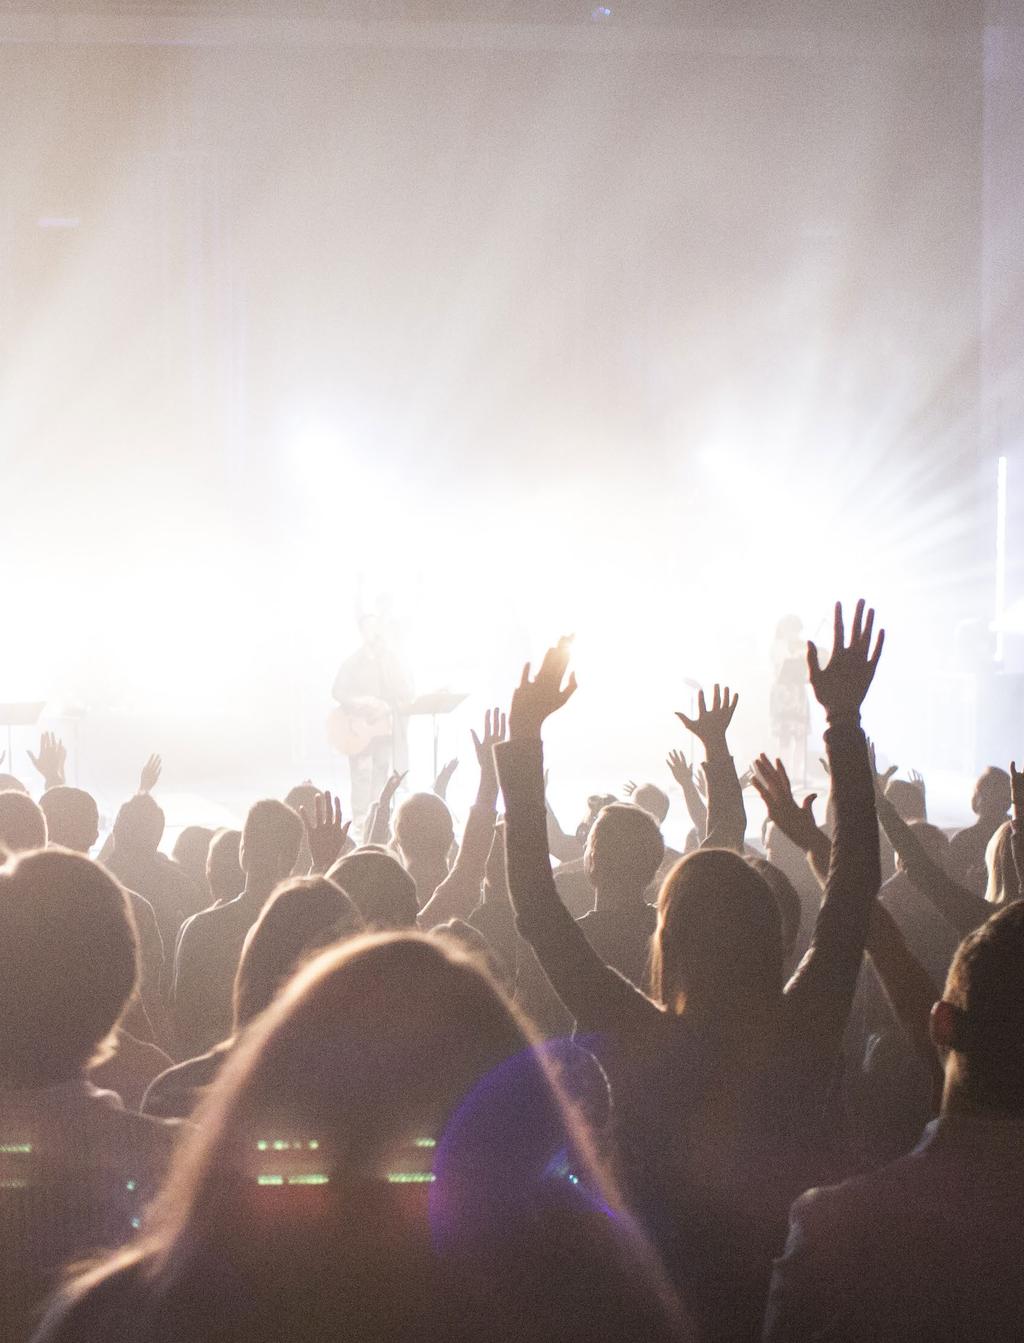 CONNECTED IN COMMUNITY Worship Worship is not just a genre of Christian music, or a combination of religious rituals. Worship is a lifestyle of surrender to God through our daily choices.